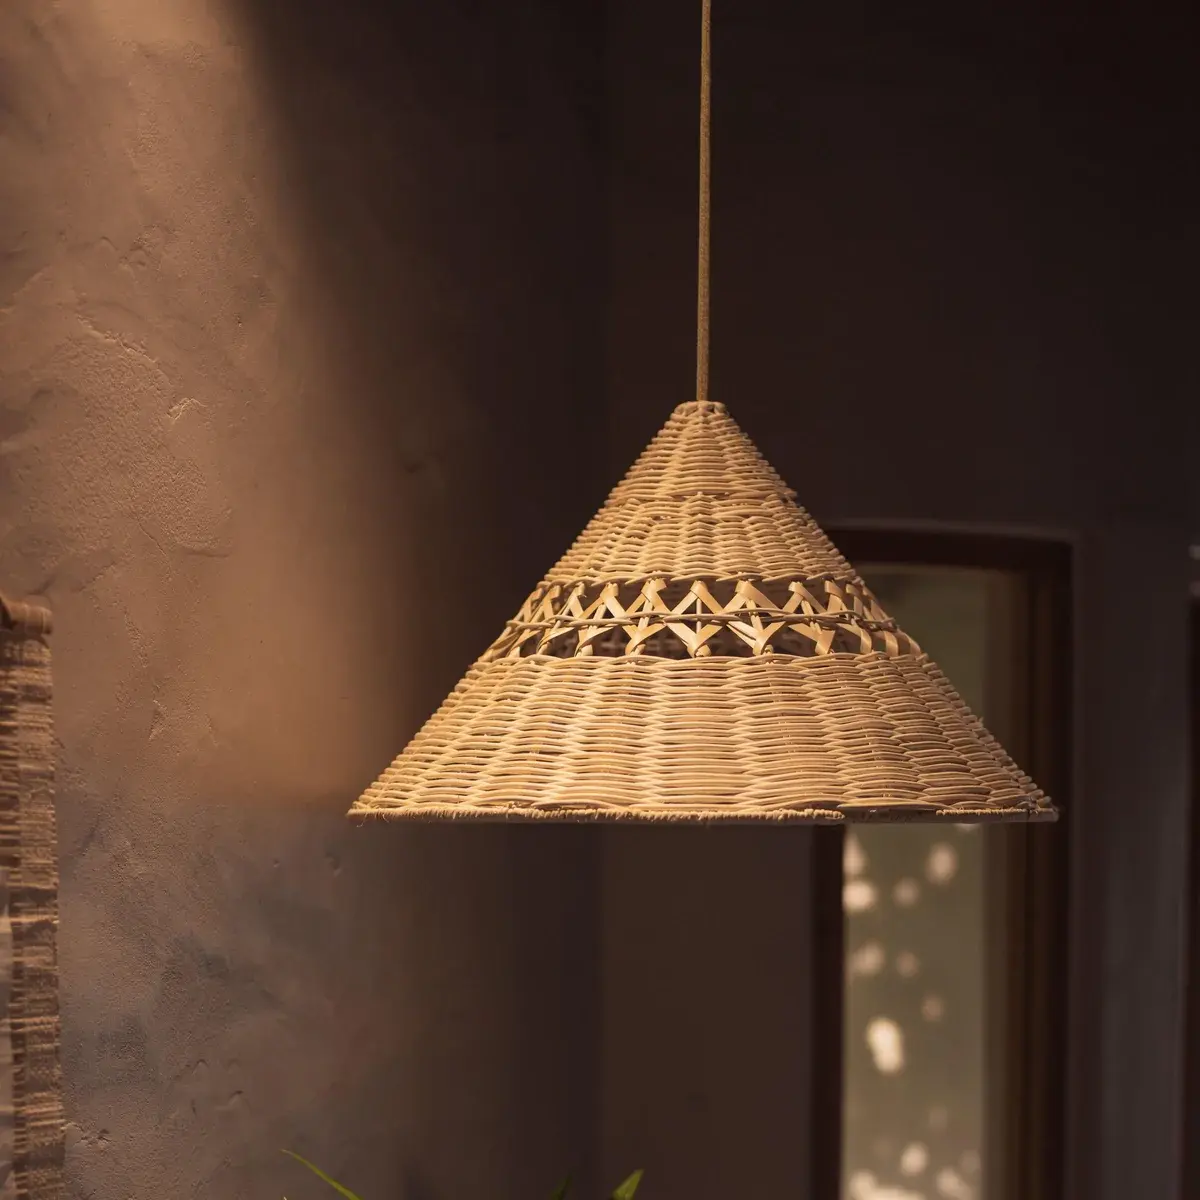 High Quality Rattan Lampshades Chandelier Lamp Ceiling Lights Wicker Furniture For Homestay Decor